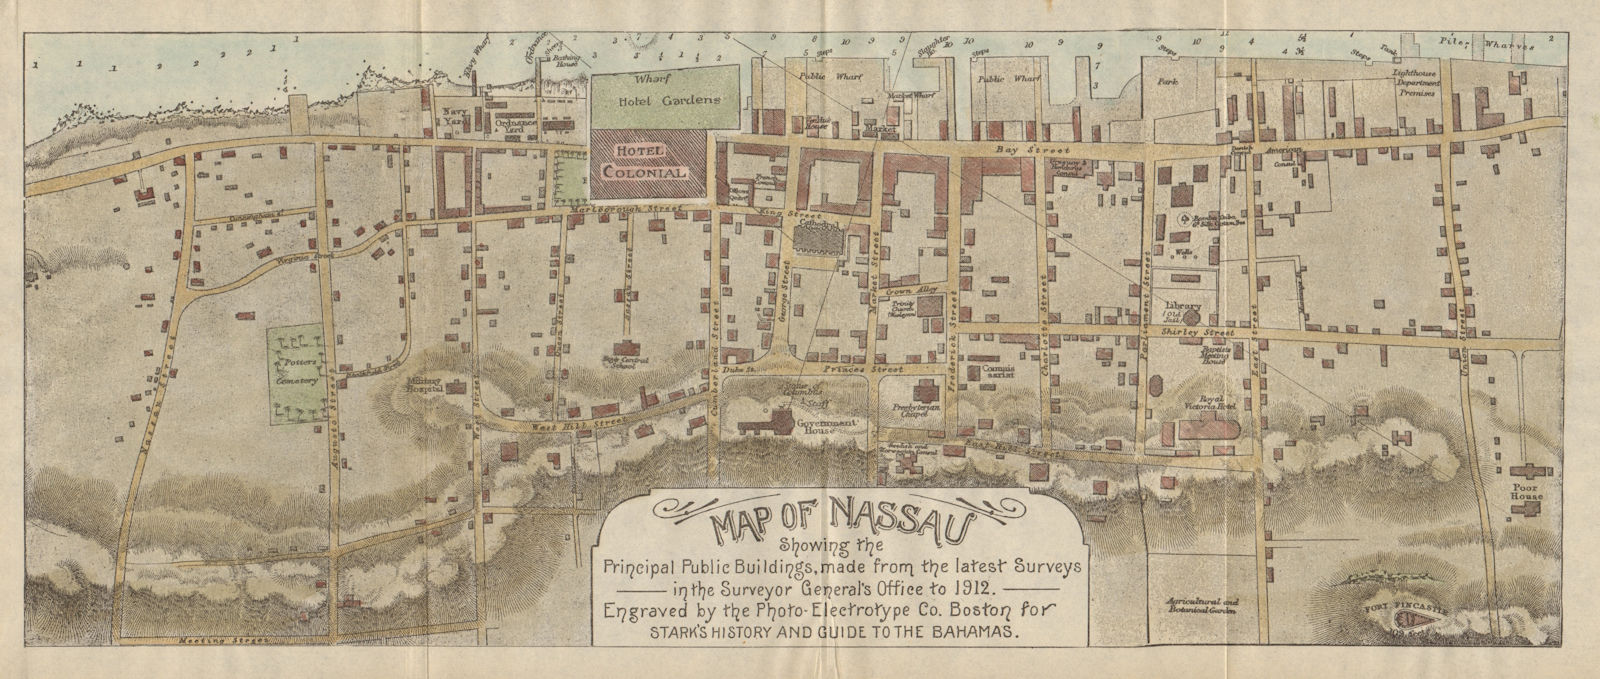 Antique town city plan of NASSAU, BAHAMAS by Stark. Hand-coloured 1891 old map